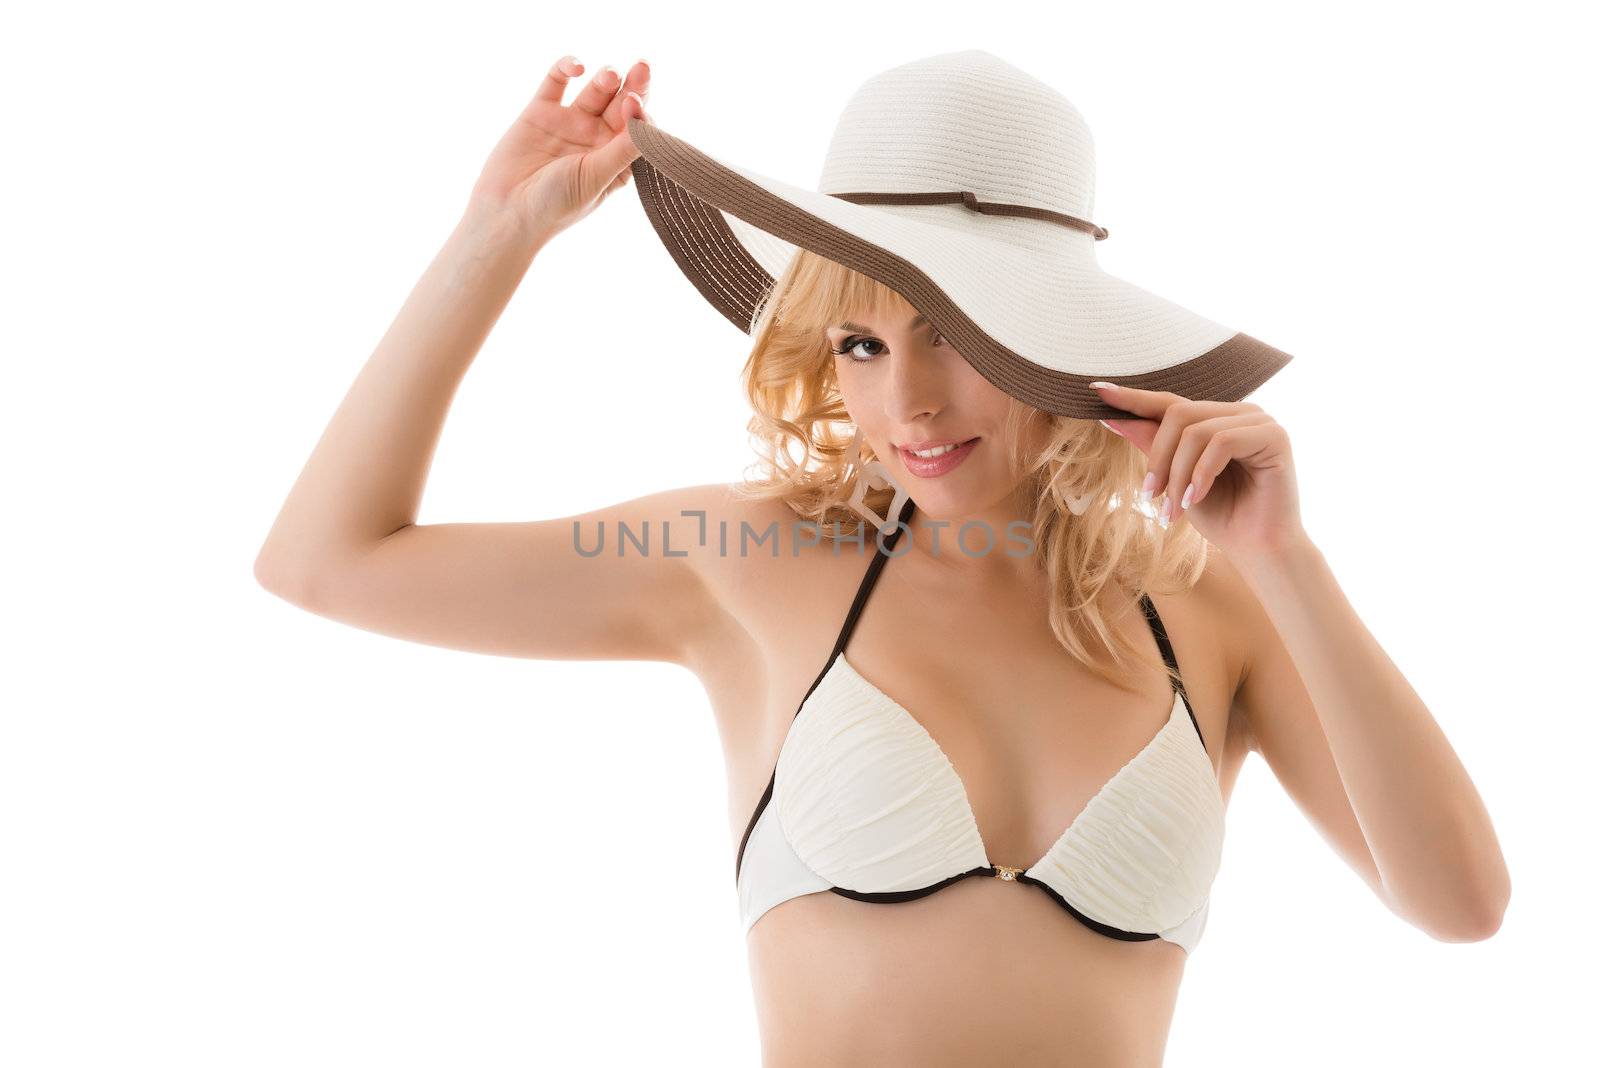 Playful nice blonde girl in bikini and hat isolated on white background